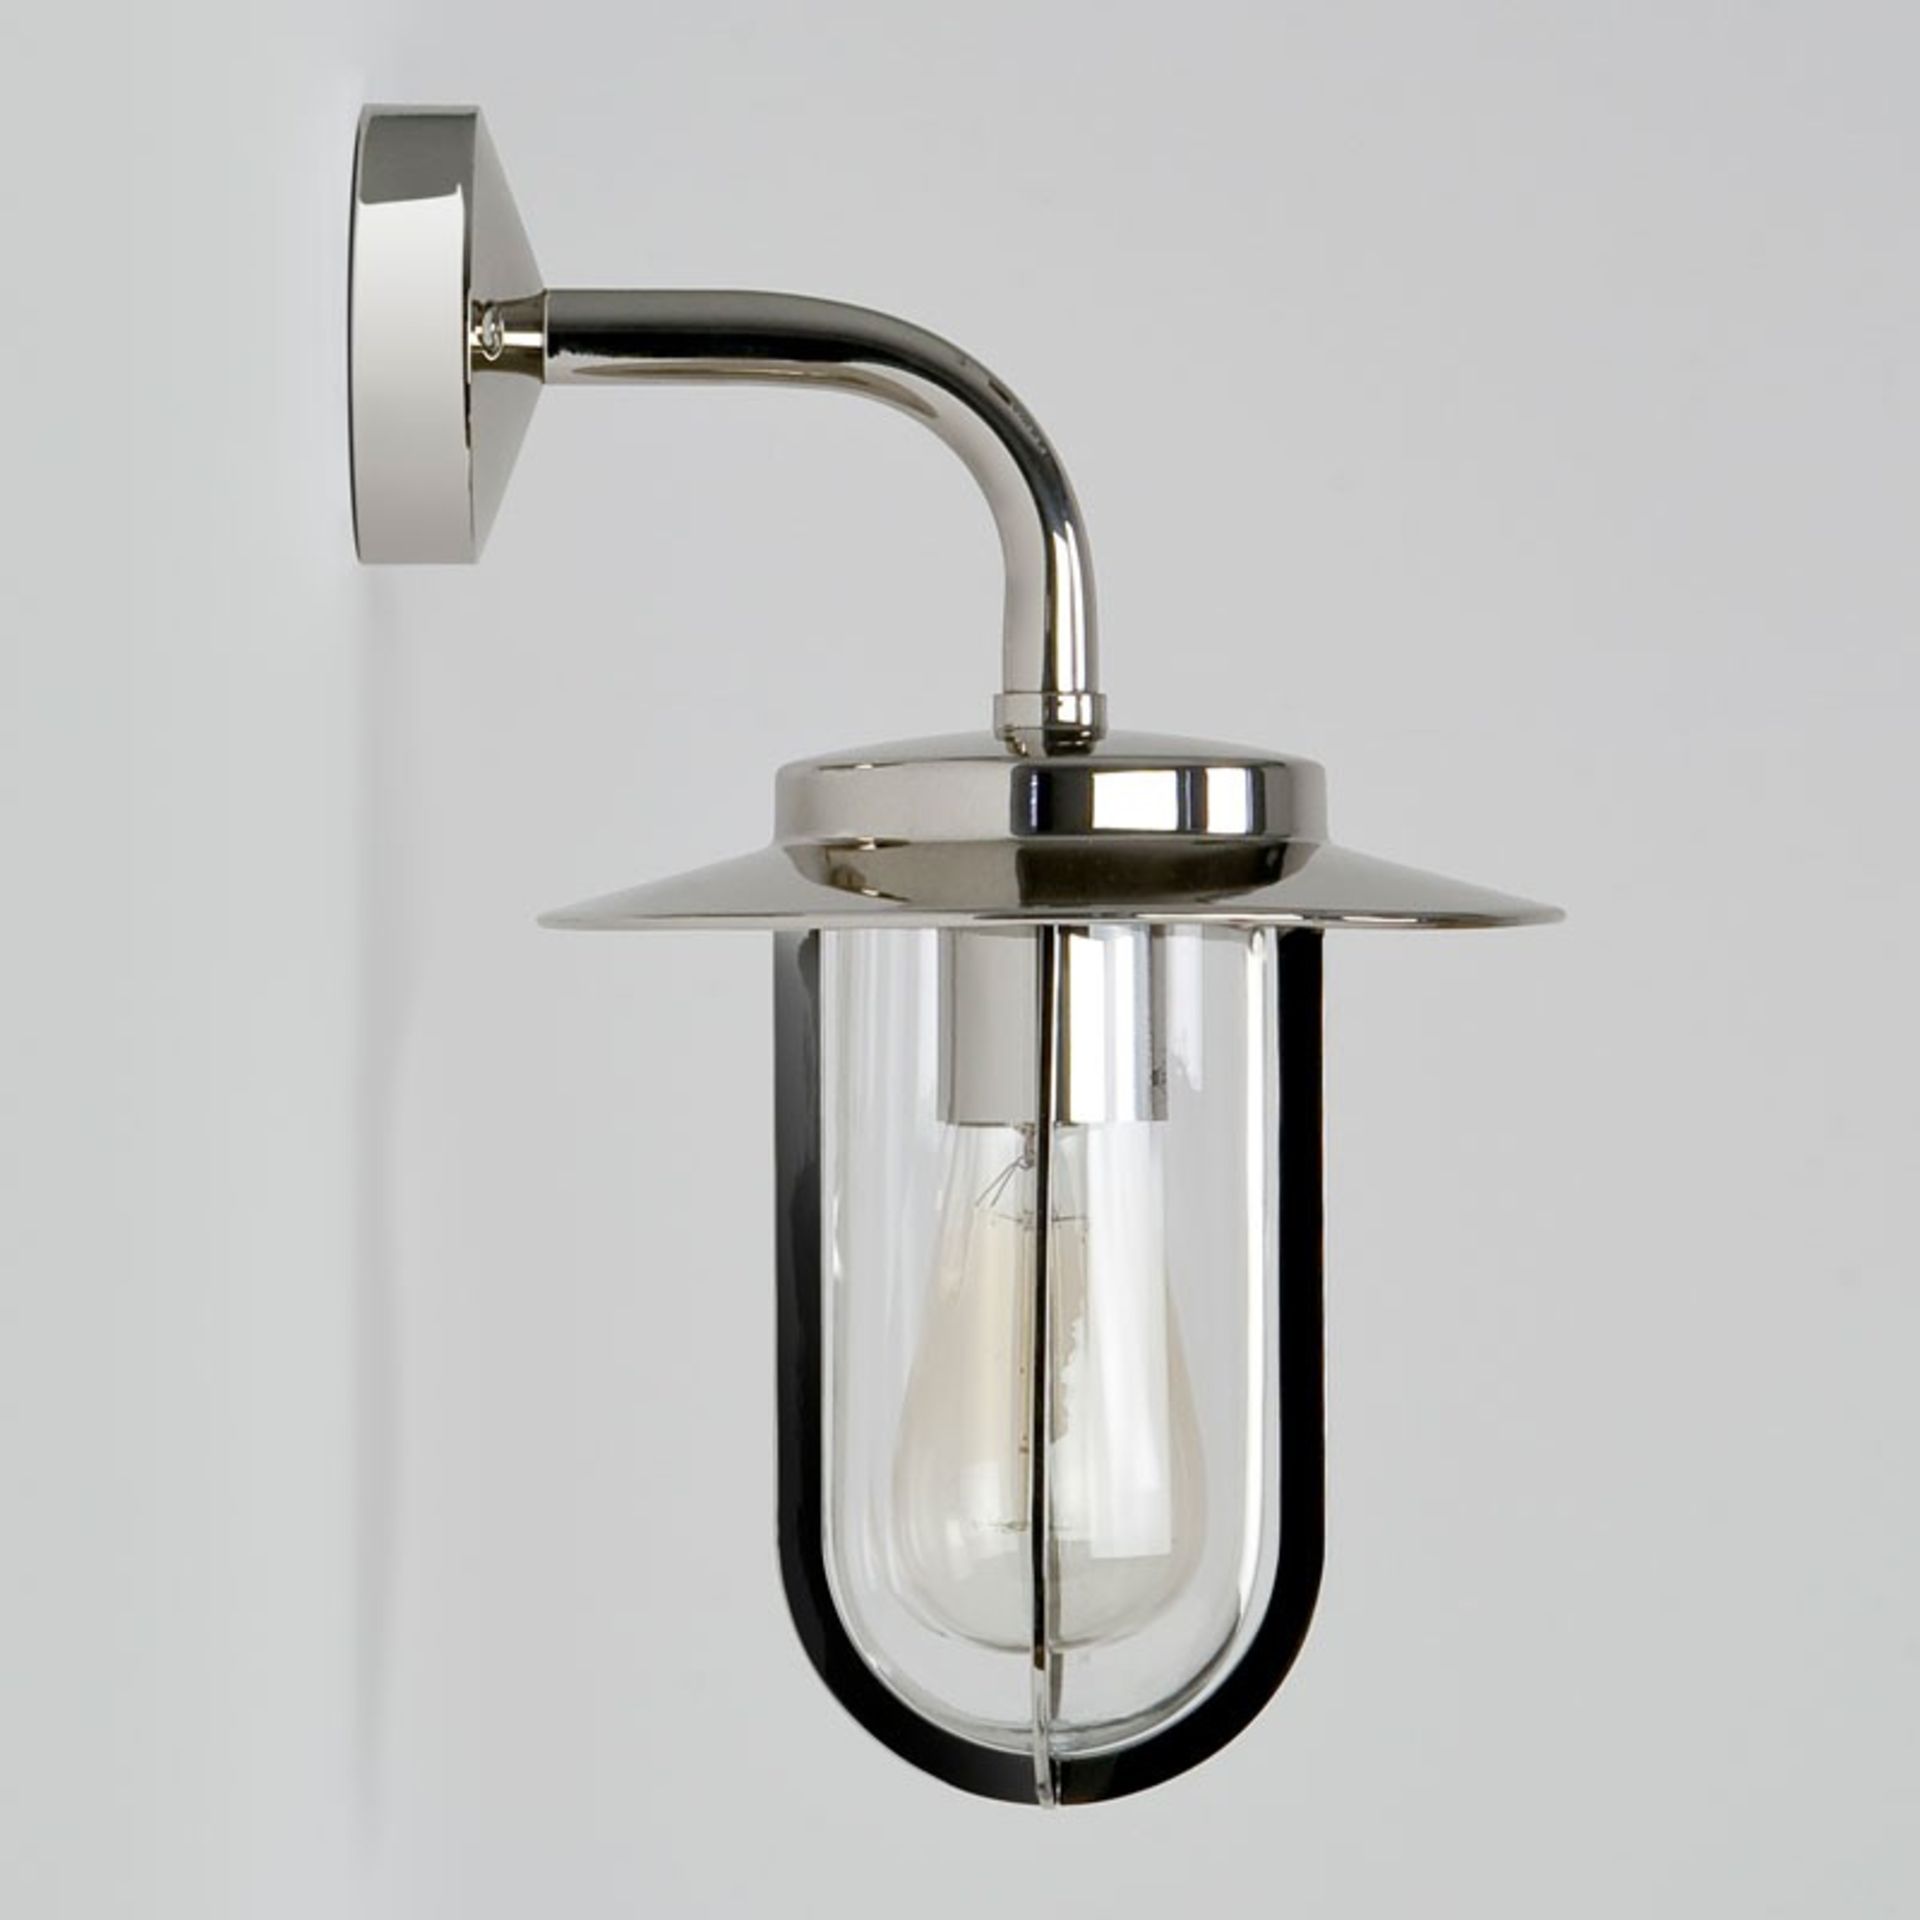 1 x BOXED ASTRO MONTPARNASSE OUTDOOR LANTERN WALL LIGHT RRP £150 (17.5.17) *PLEASE NOTE THAT THE BID